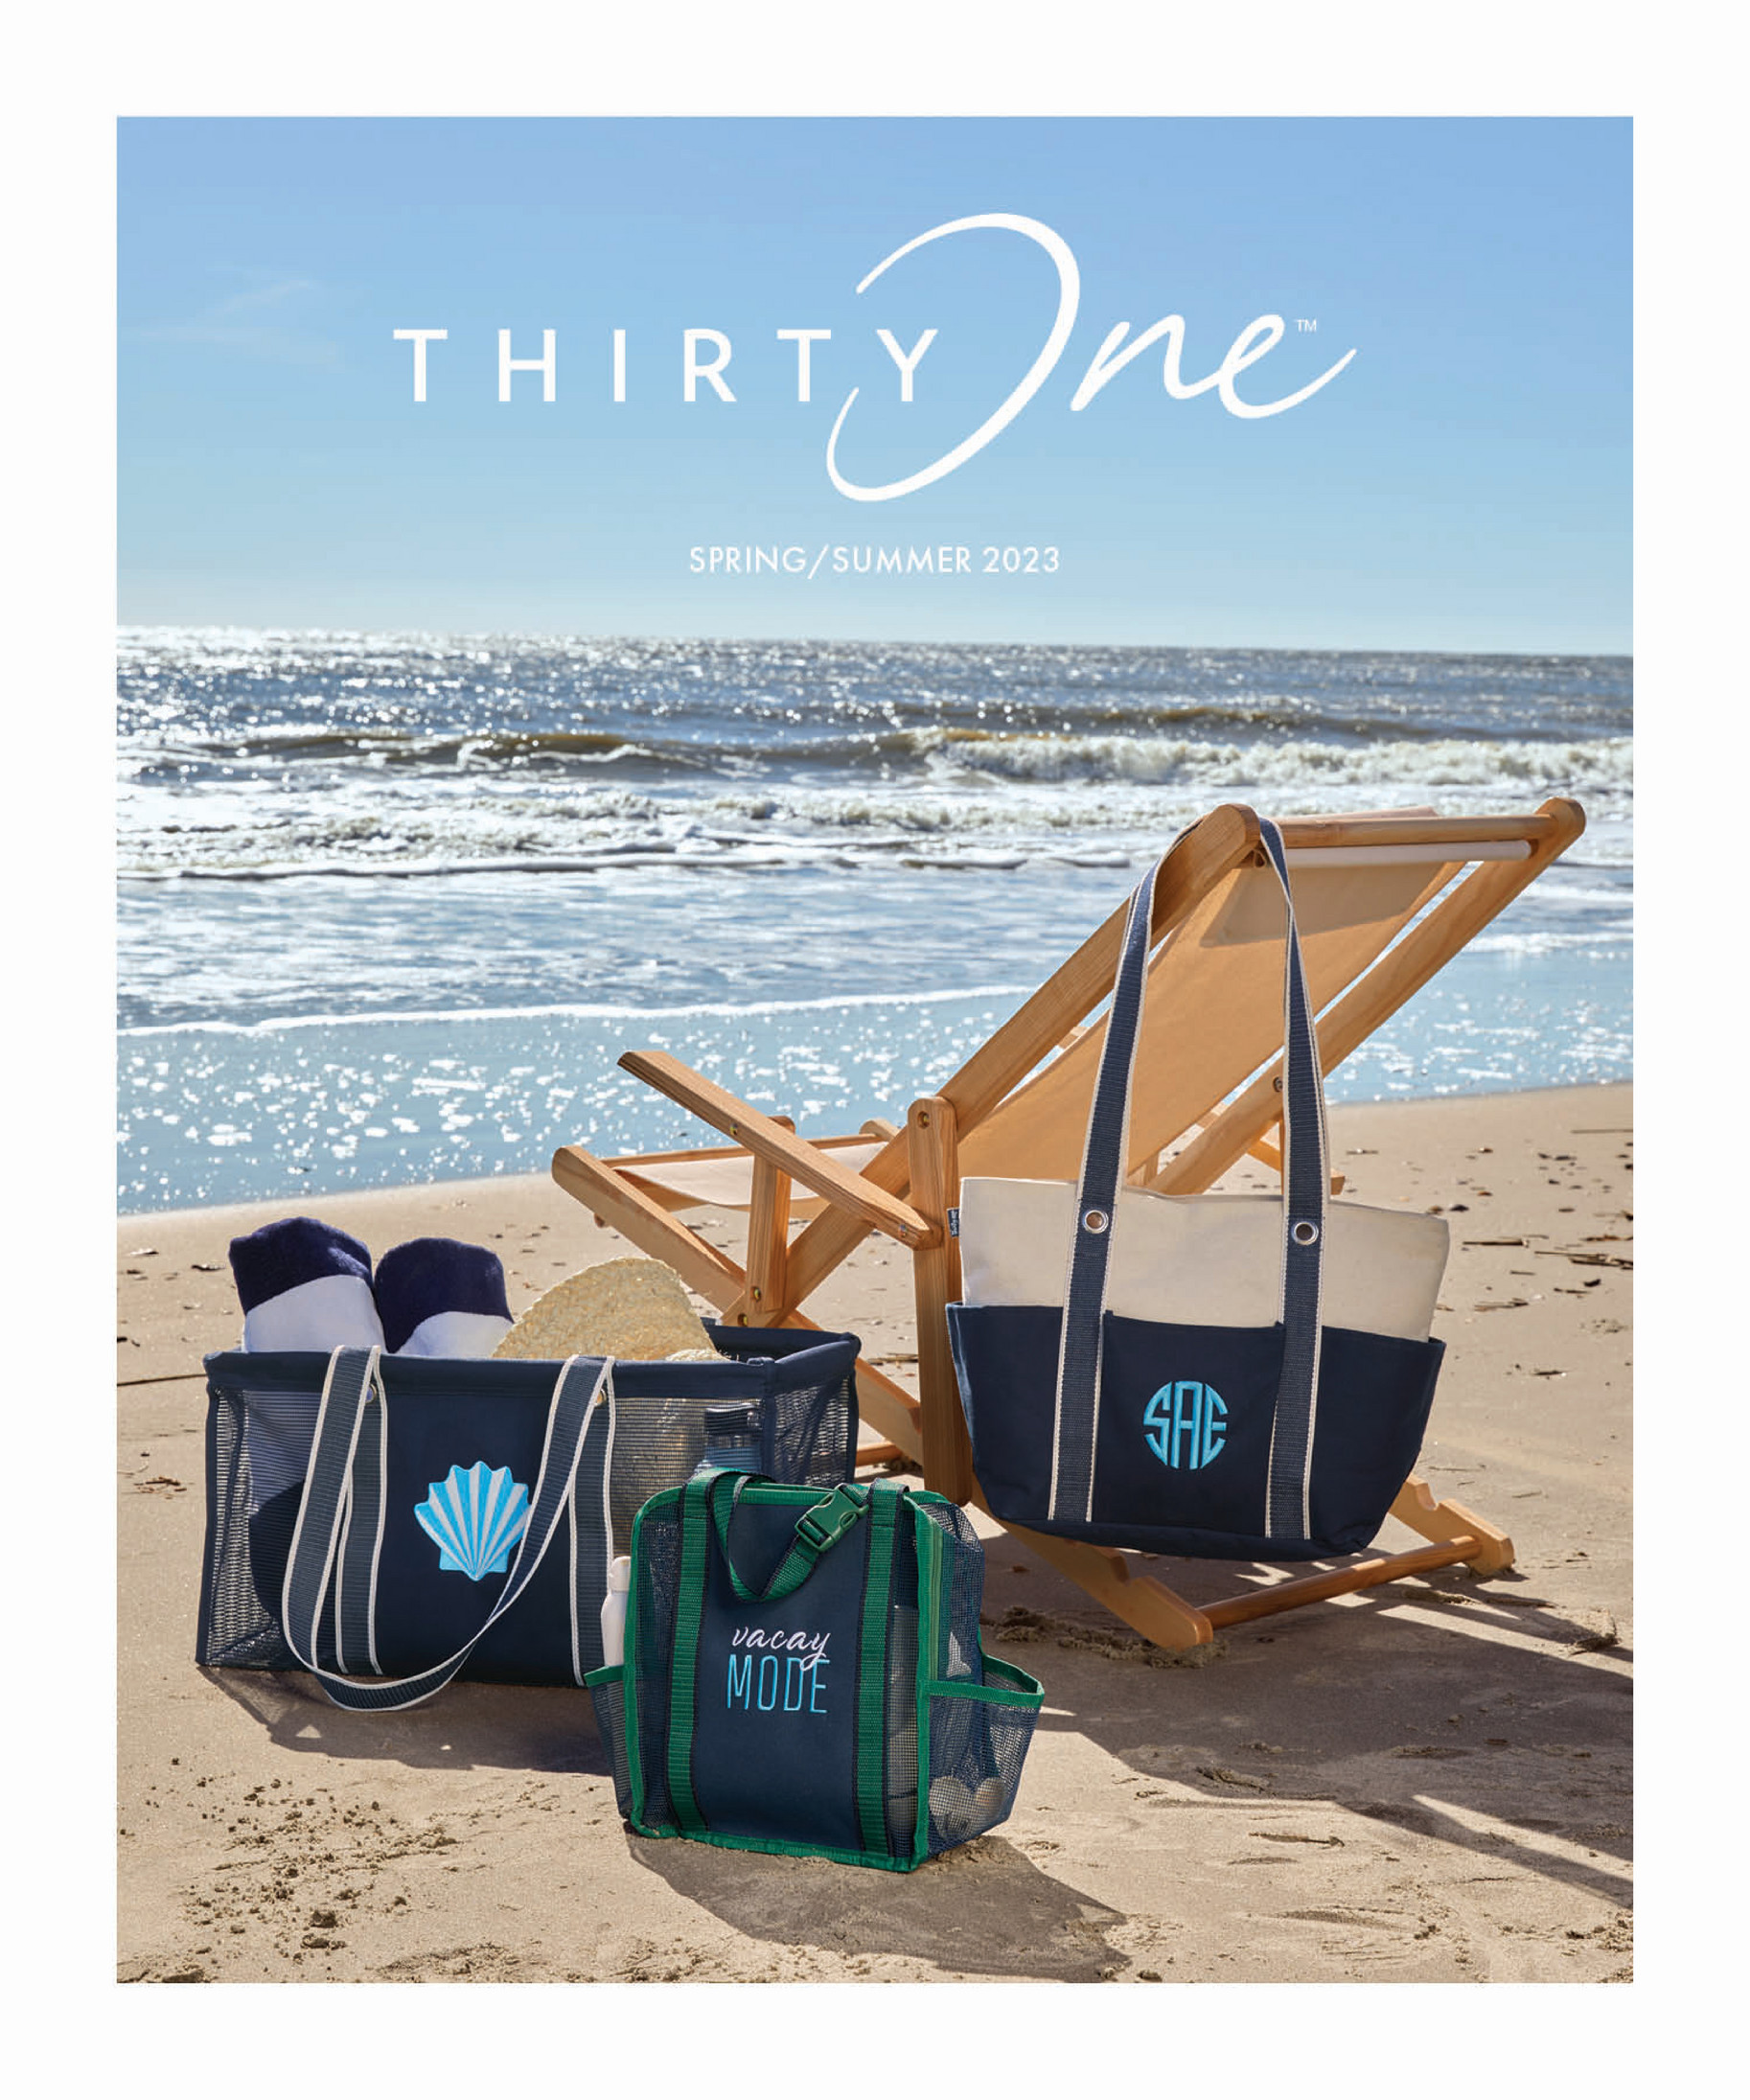 Pin on Thirty-One 2018 Spring/Summer